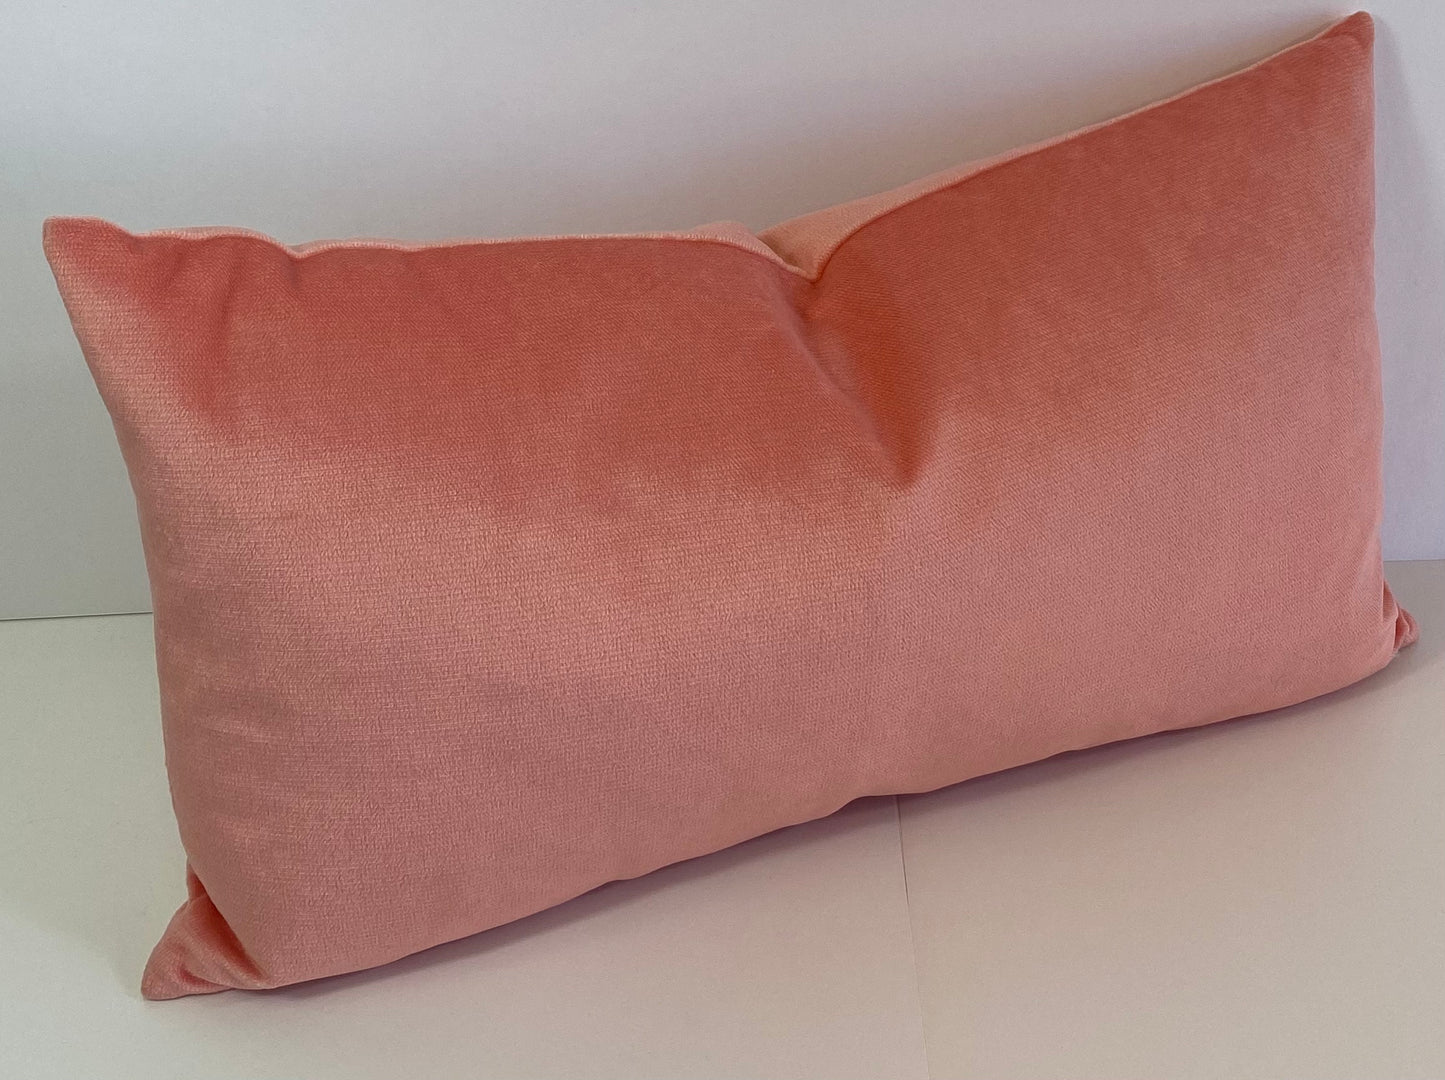 REDUCED TO CLEAR Luxury Lumbar Pillow - 24" x 14" - Belvedere Lumbar - Pale Blush; pale pink velvet